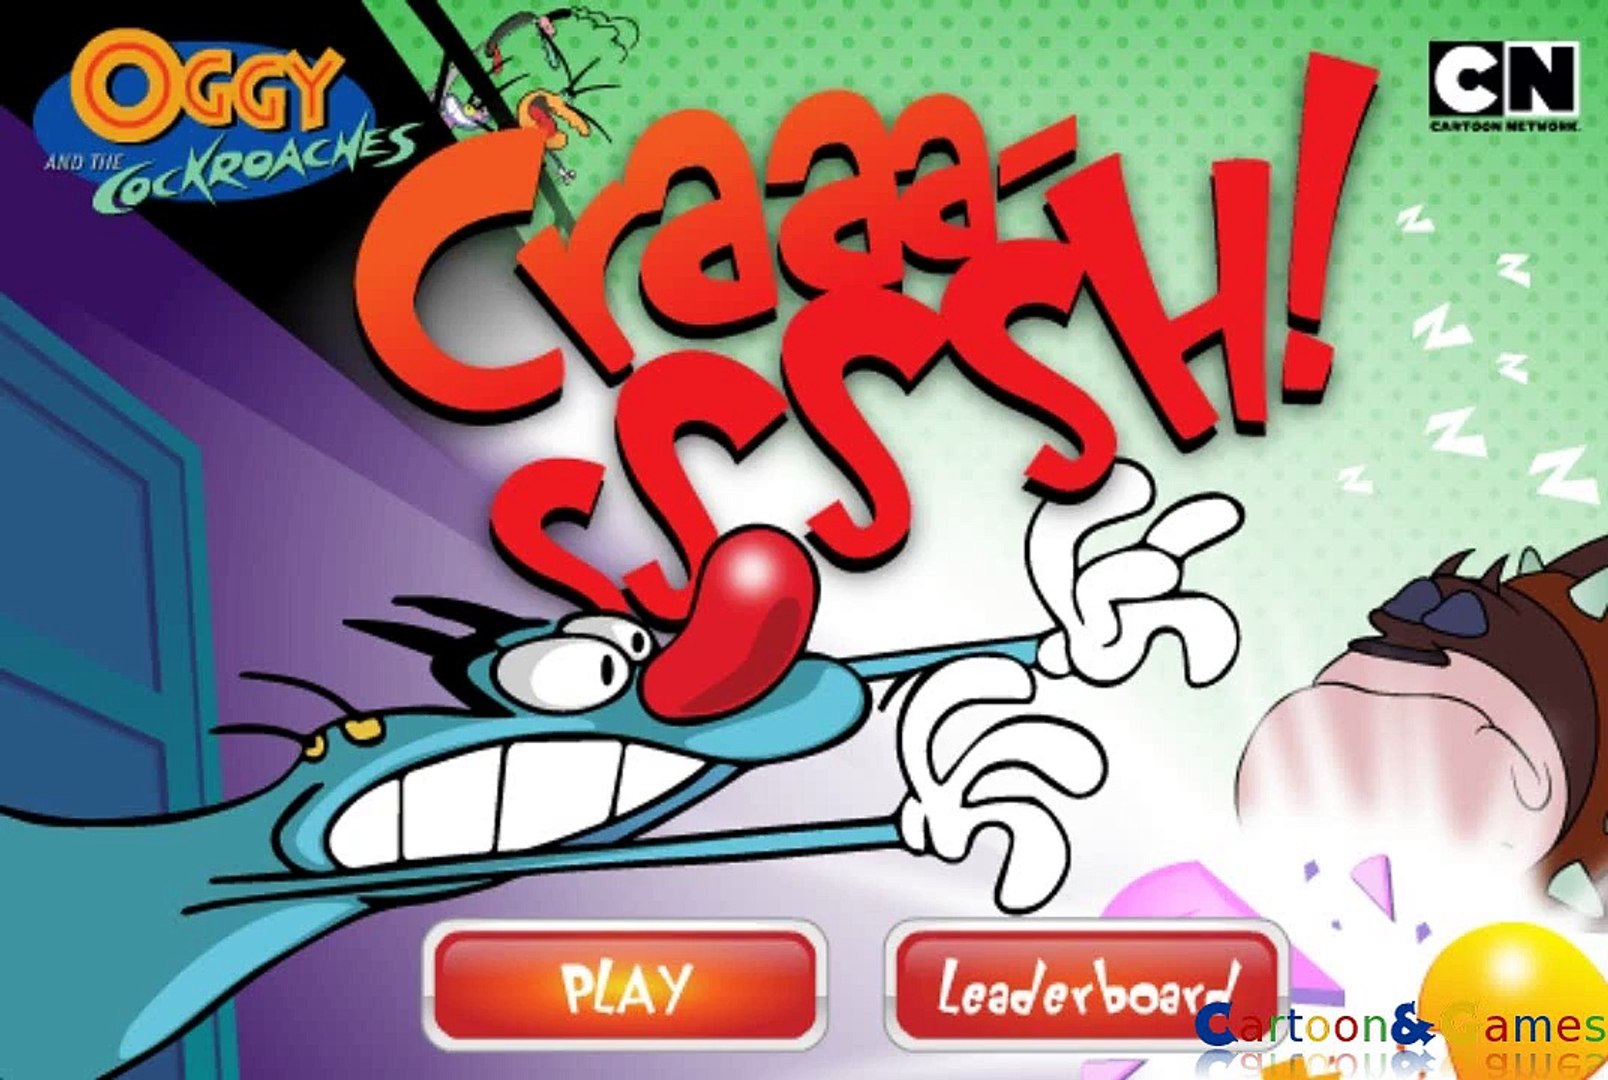 OGGY AND THE COCKROACHES - CN GAME - COCKROACH CRAASSH - Vidéo Dailymotion